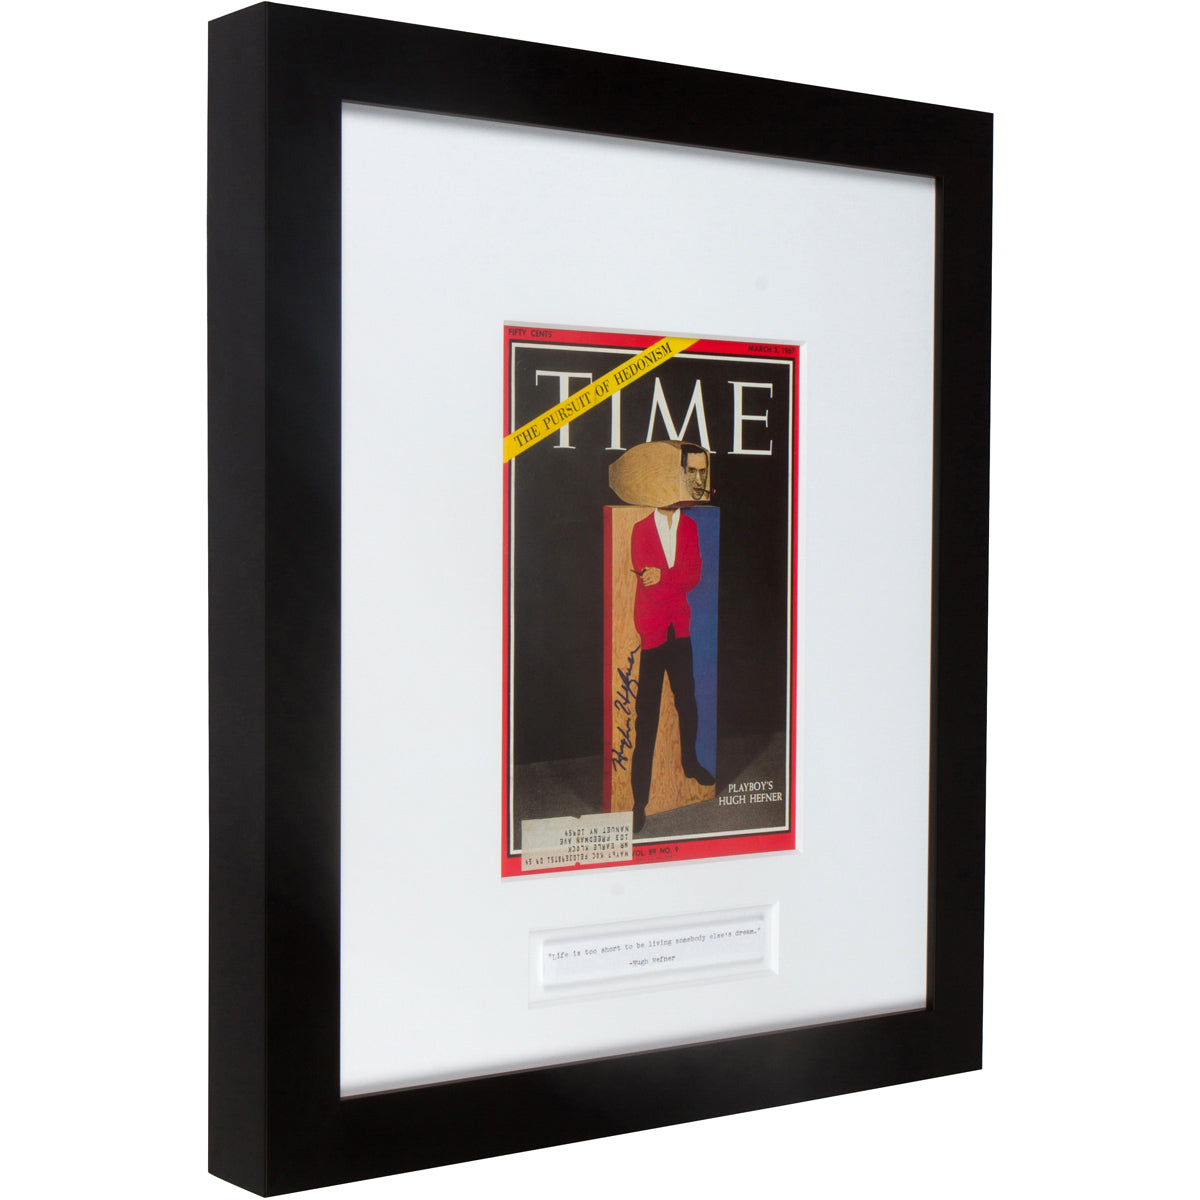 Hugh Hefner Signed 1967 TIME Magazine Cover: “Life is too short to be living someone else’s dream.”